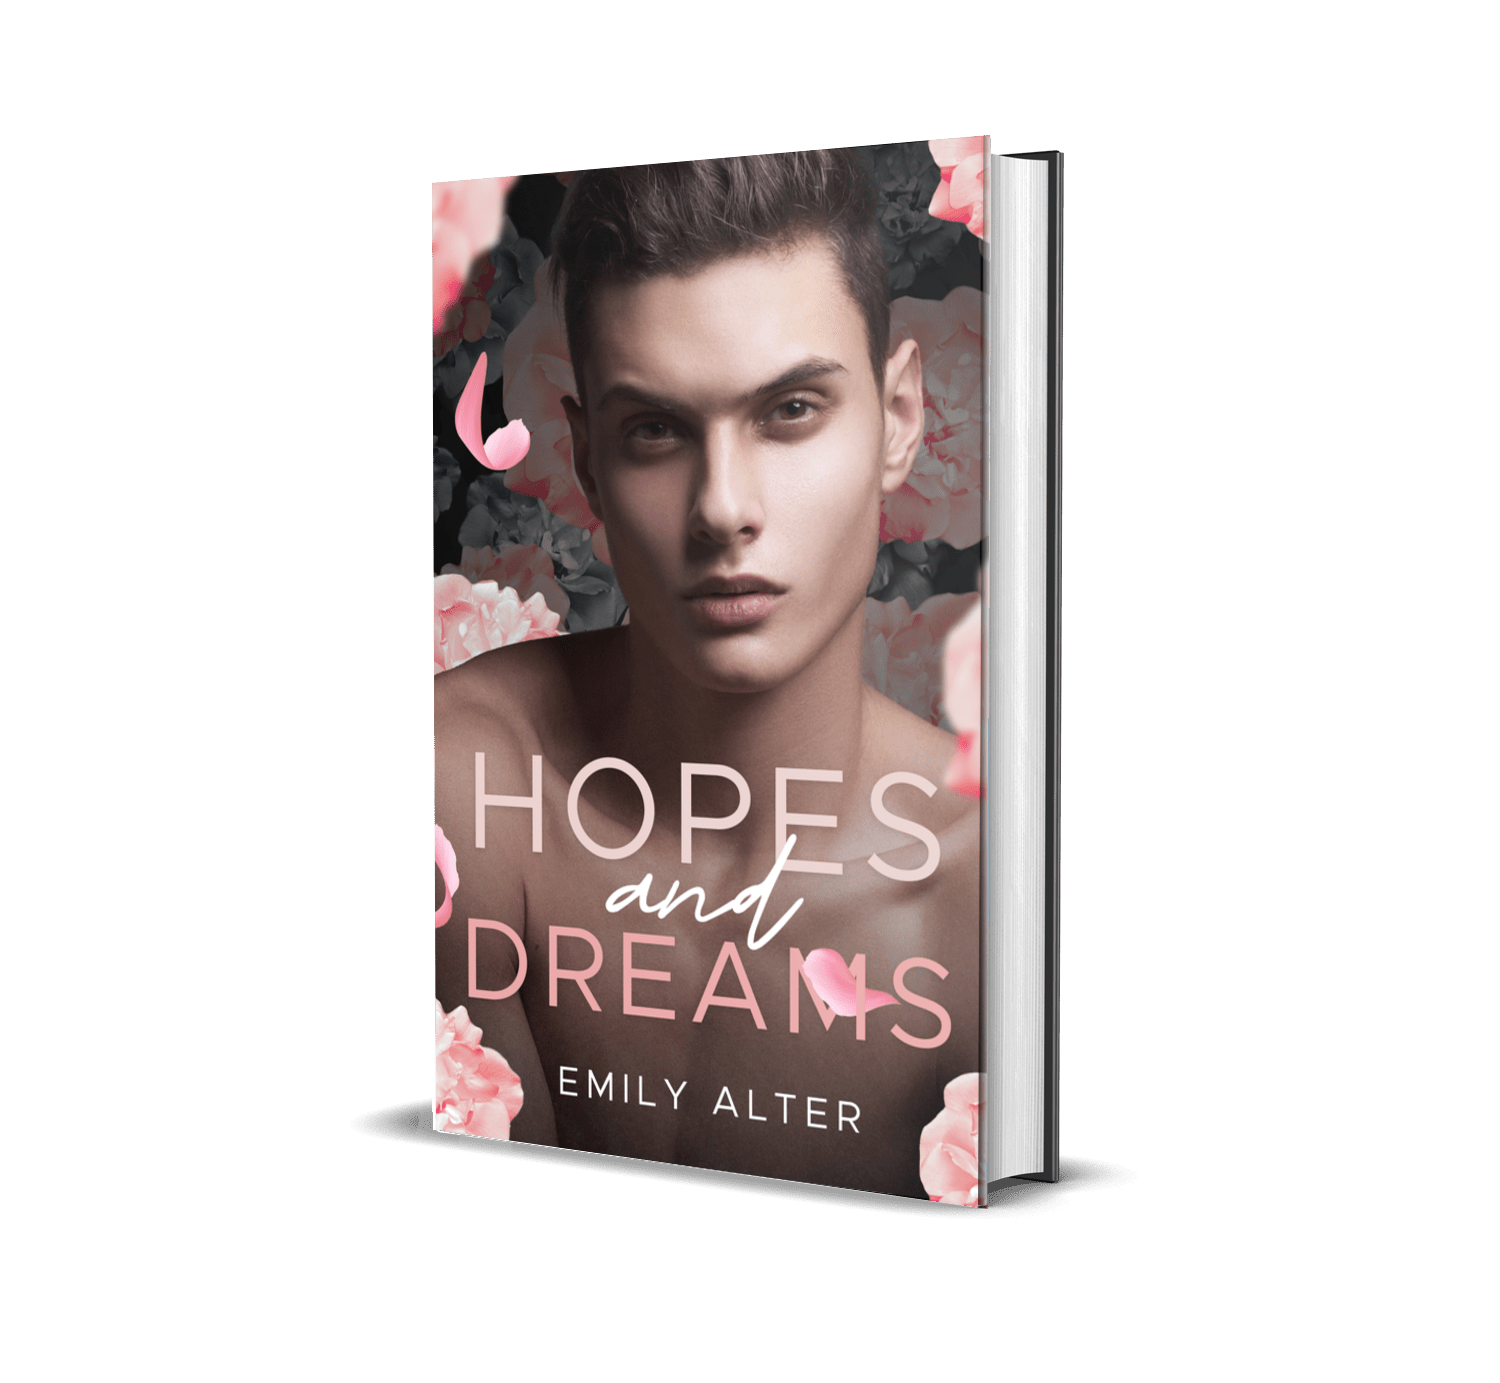 Hopes and Dreams: gay romance book by Emily Alter